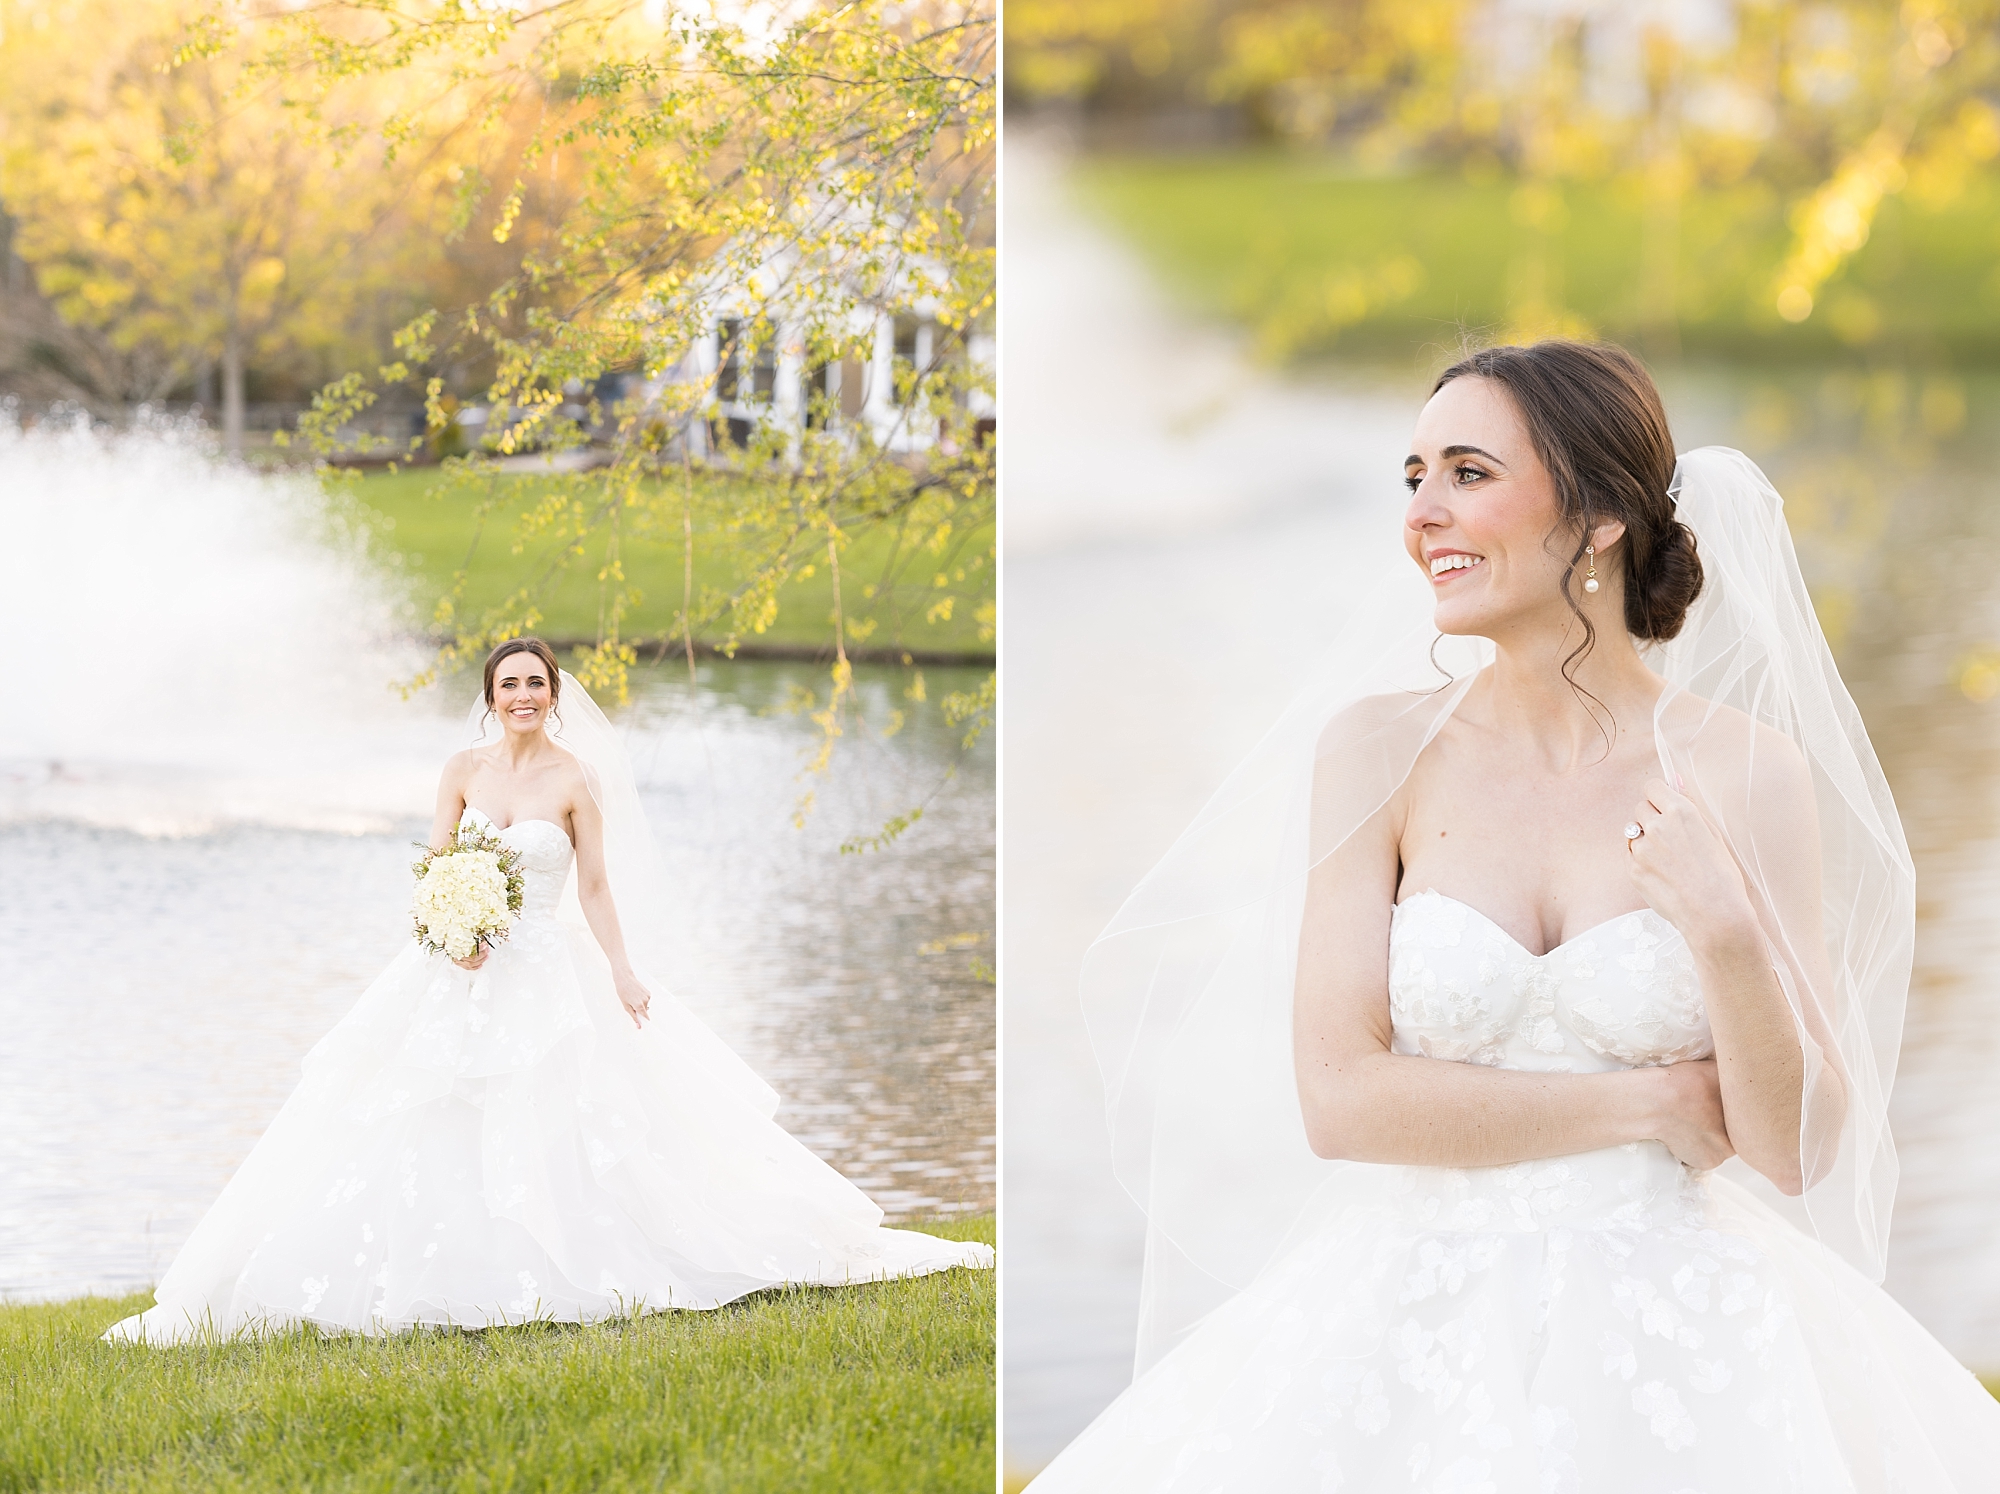 Bridal portraits by a pond in an elegant ballgown at Southern Grace Farms in Angier | Raleigh Wedding Photographer